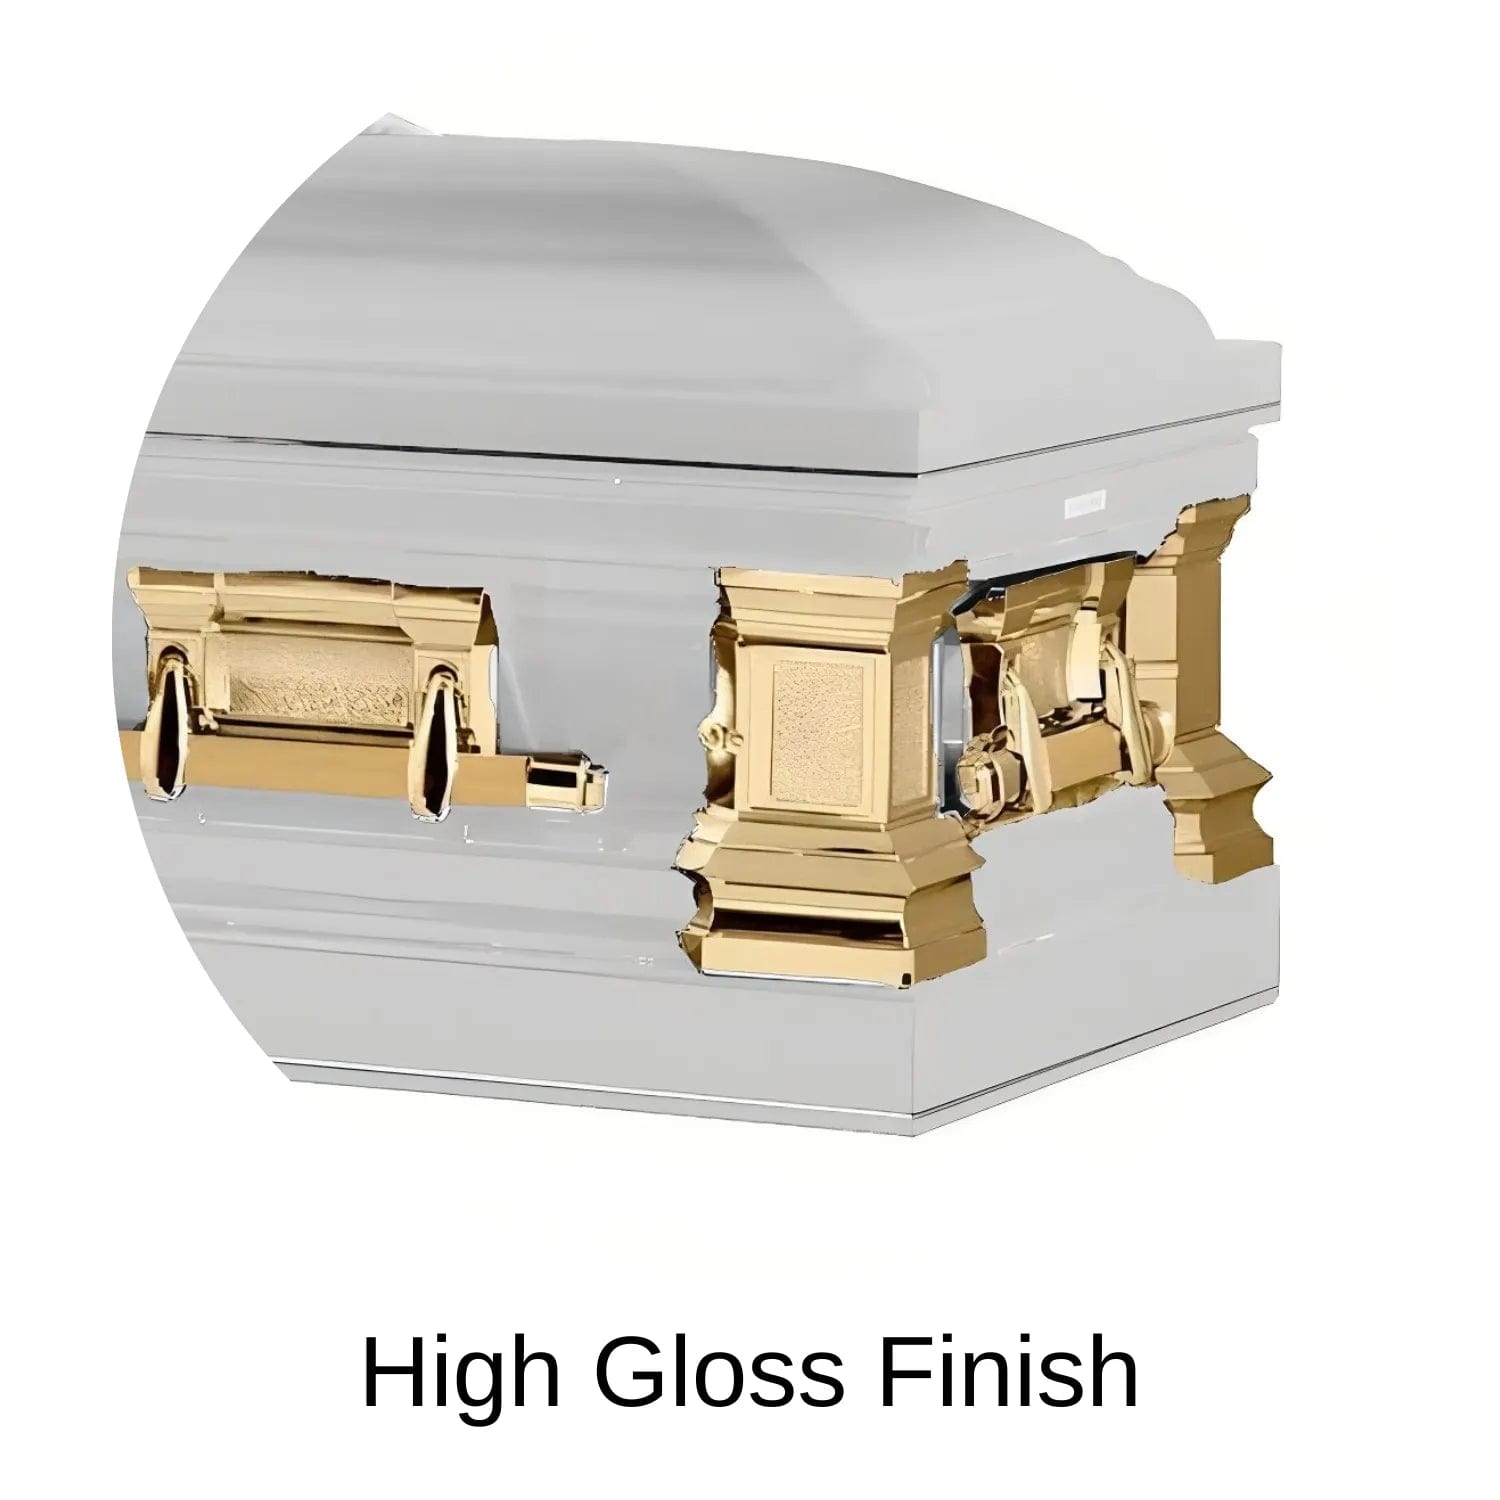 Load image into Gallery viewer, Brushed High Gloss Finish of Titan Casket Era Series Casket
